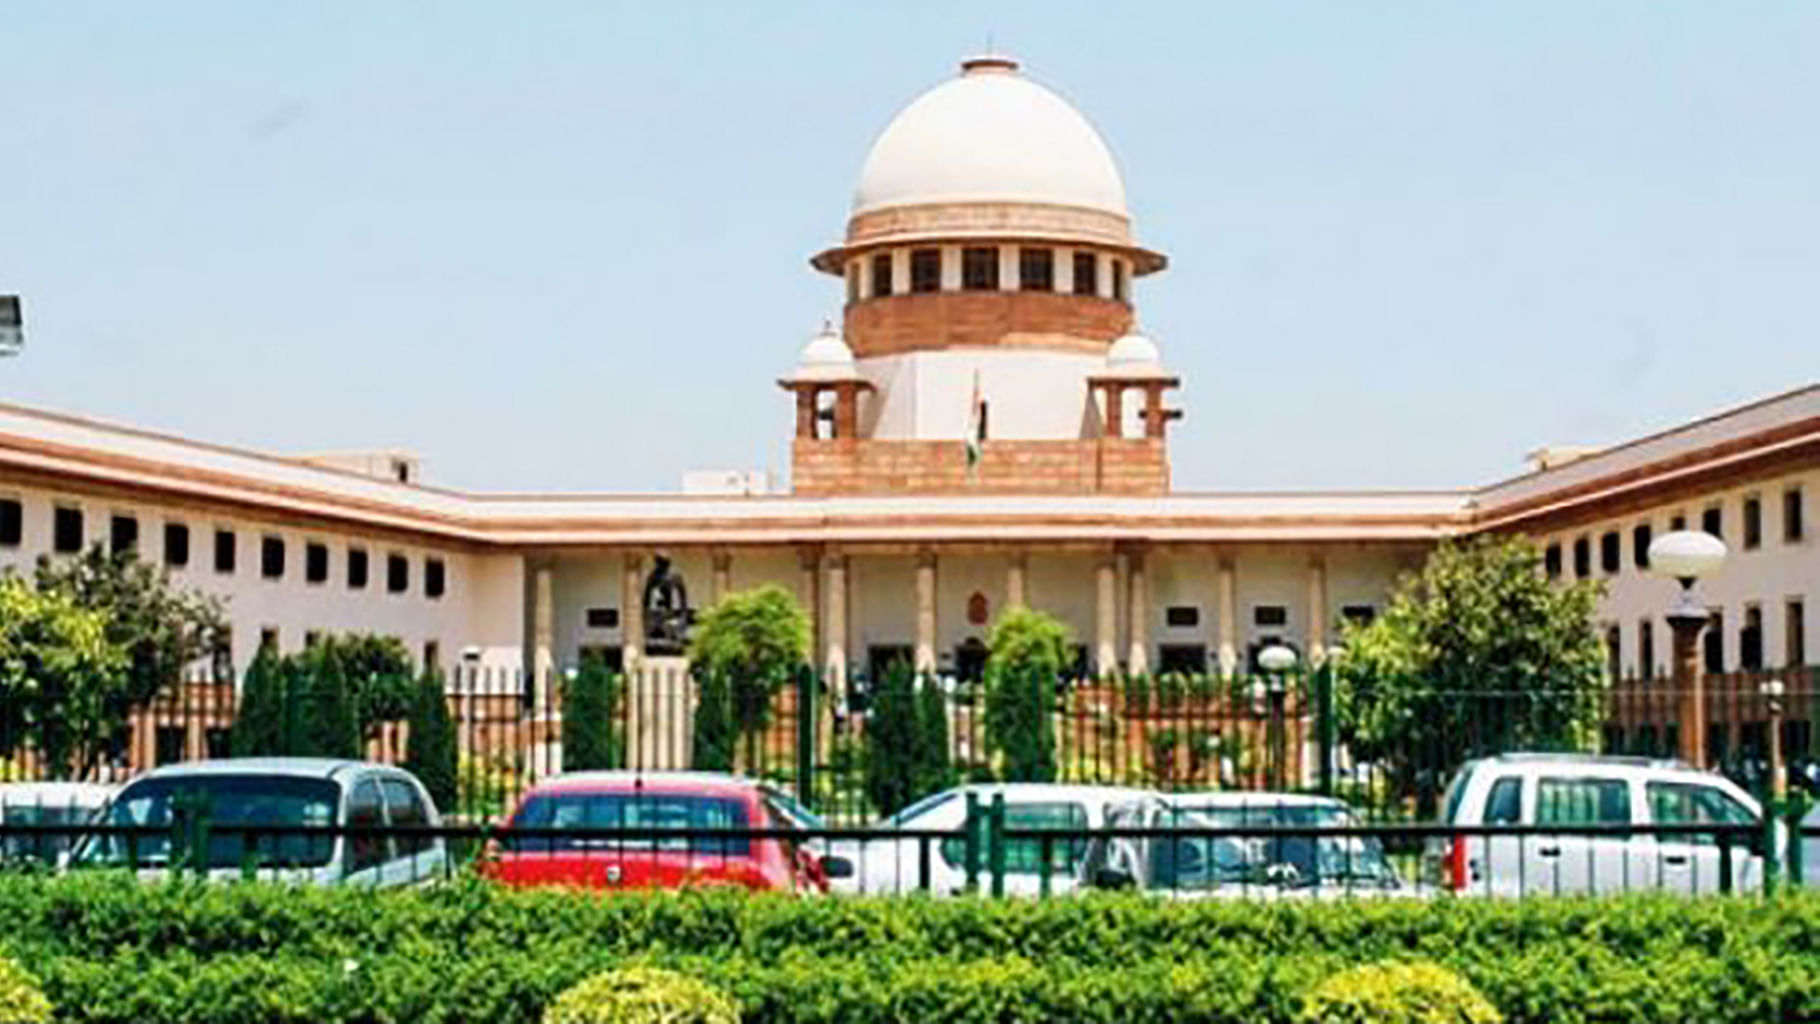 The Supreme Court of India. Image used for representational purposes.